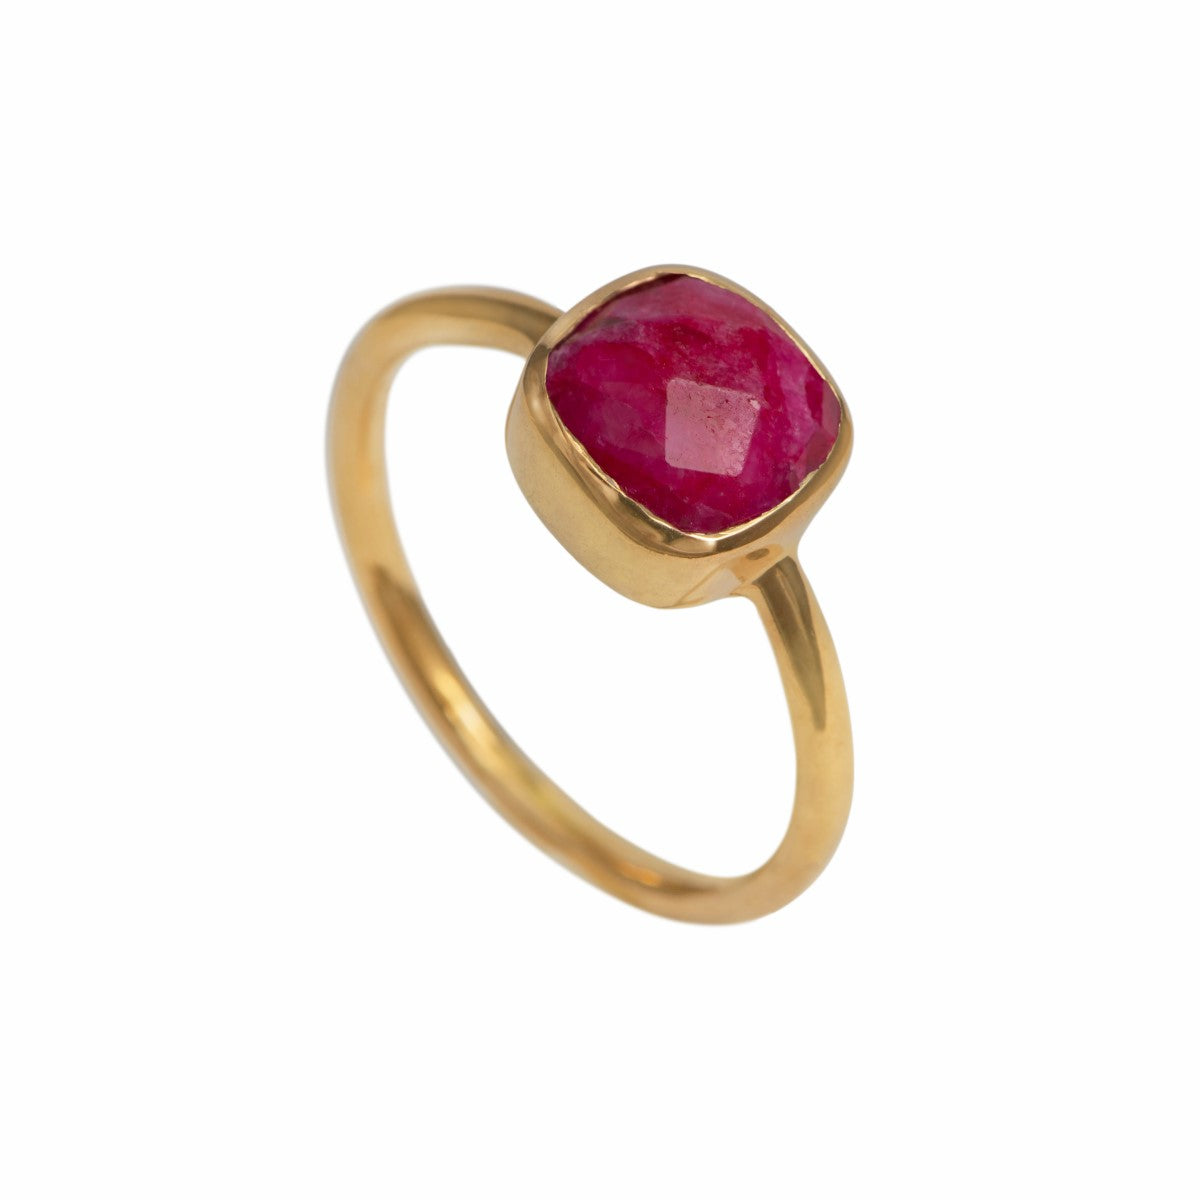 Faceted Square Cut Natural Gemstone Gold Plated Sterling Silver Solitaire Ring - Ruby Quartz